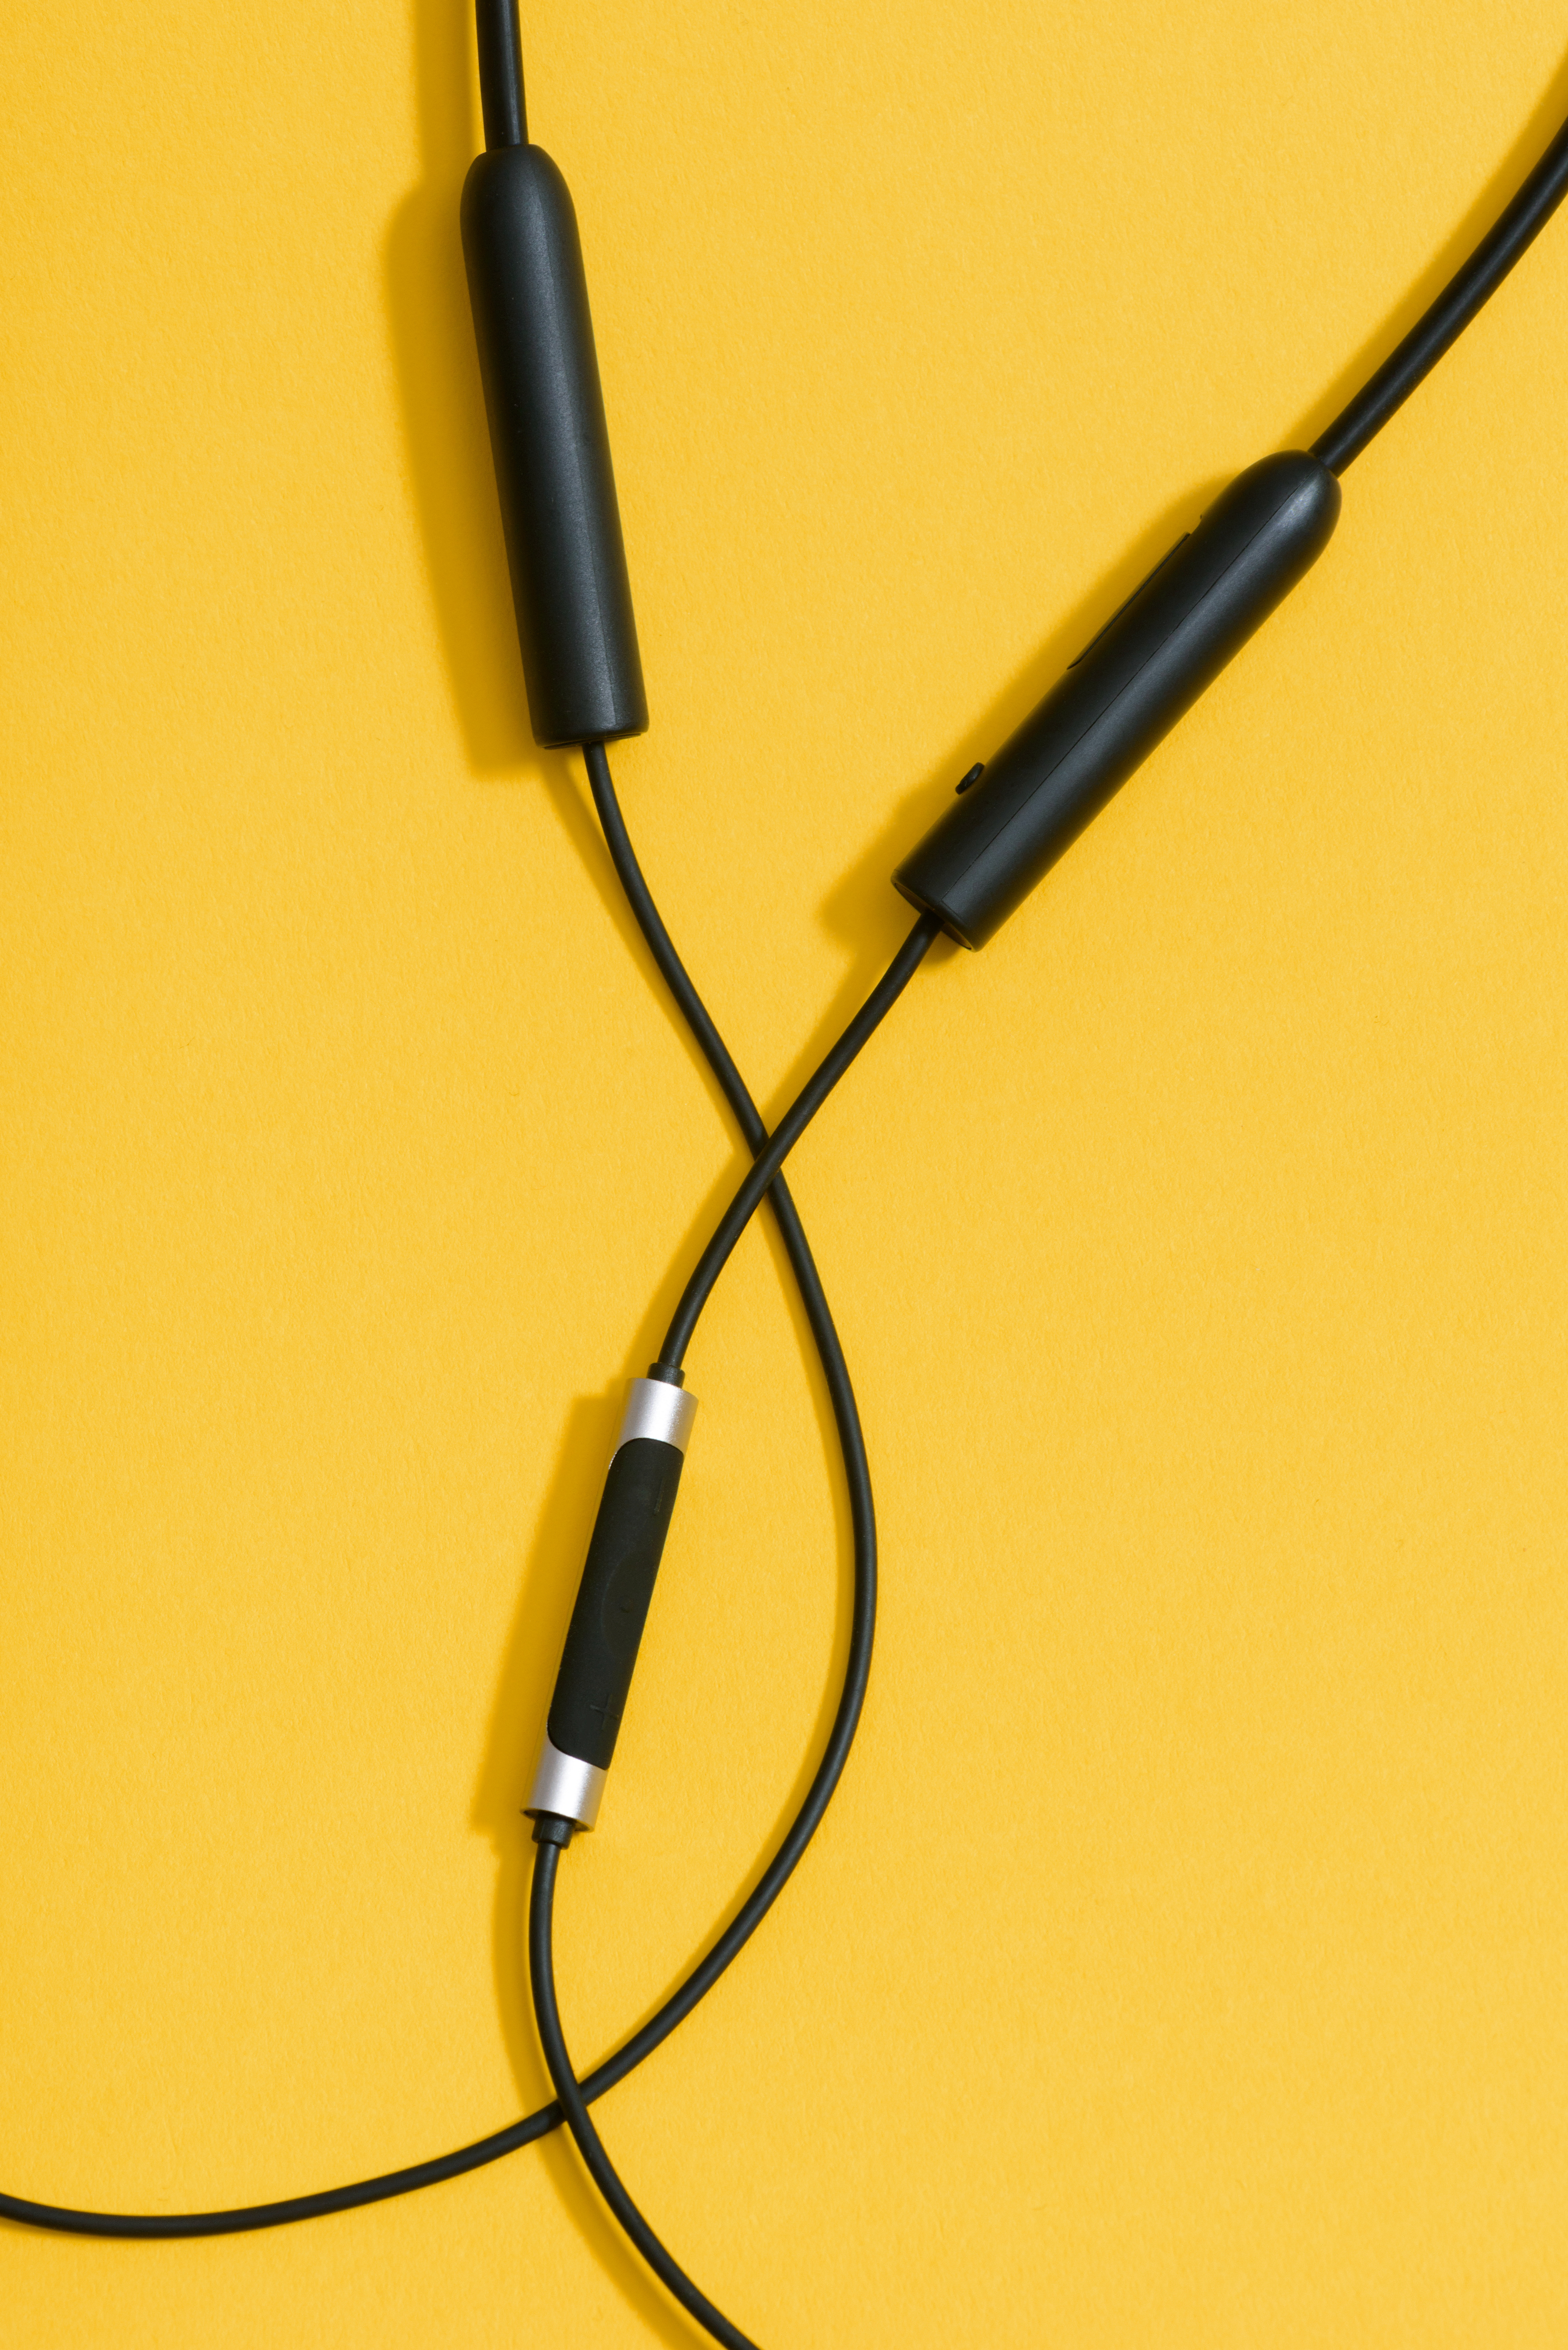 RHA MA390 Wireless announcement: A close-up of the in-line mic and remote on a yellow background.